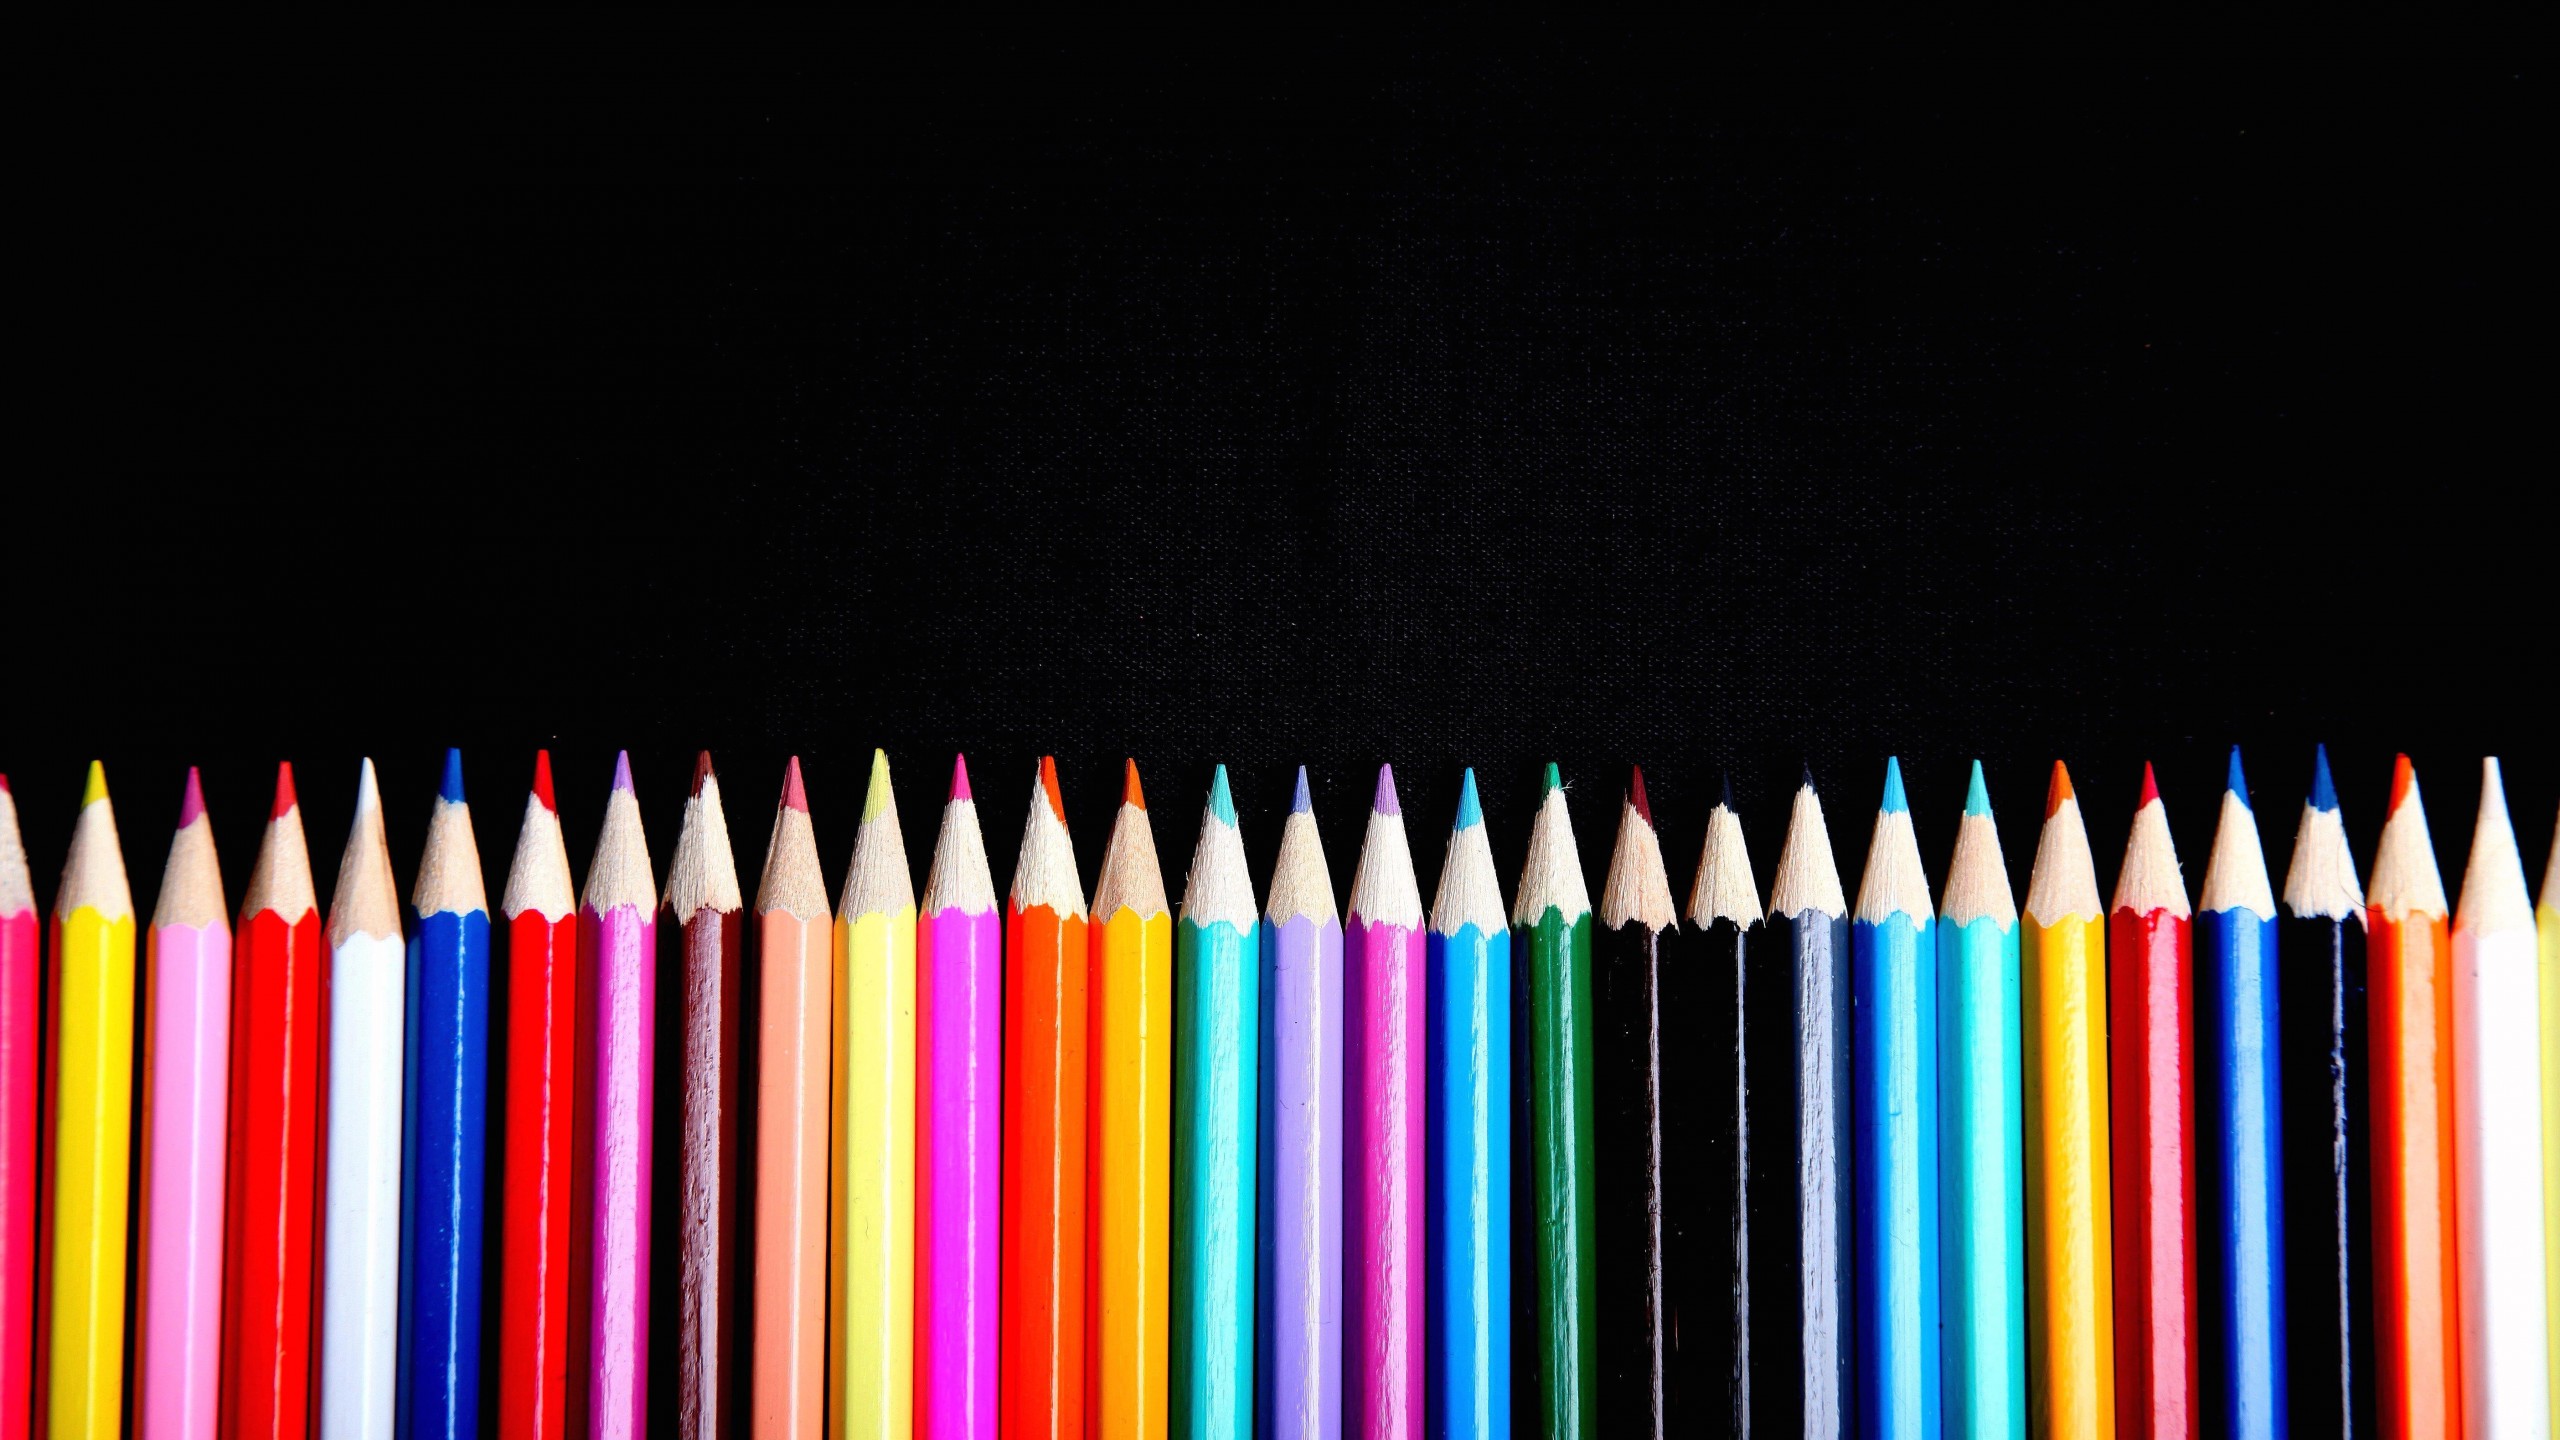  Pencil border colorful craft backgrounds 4k uhd wallpapers